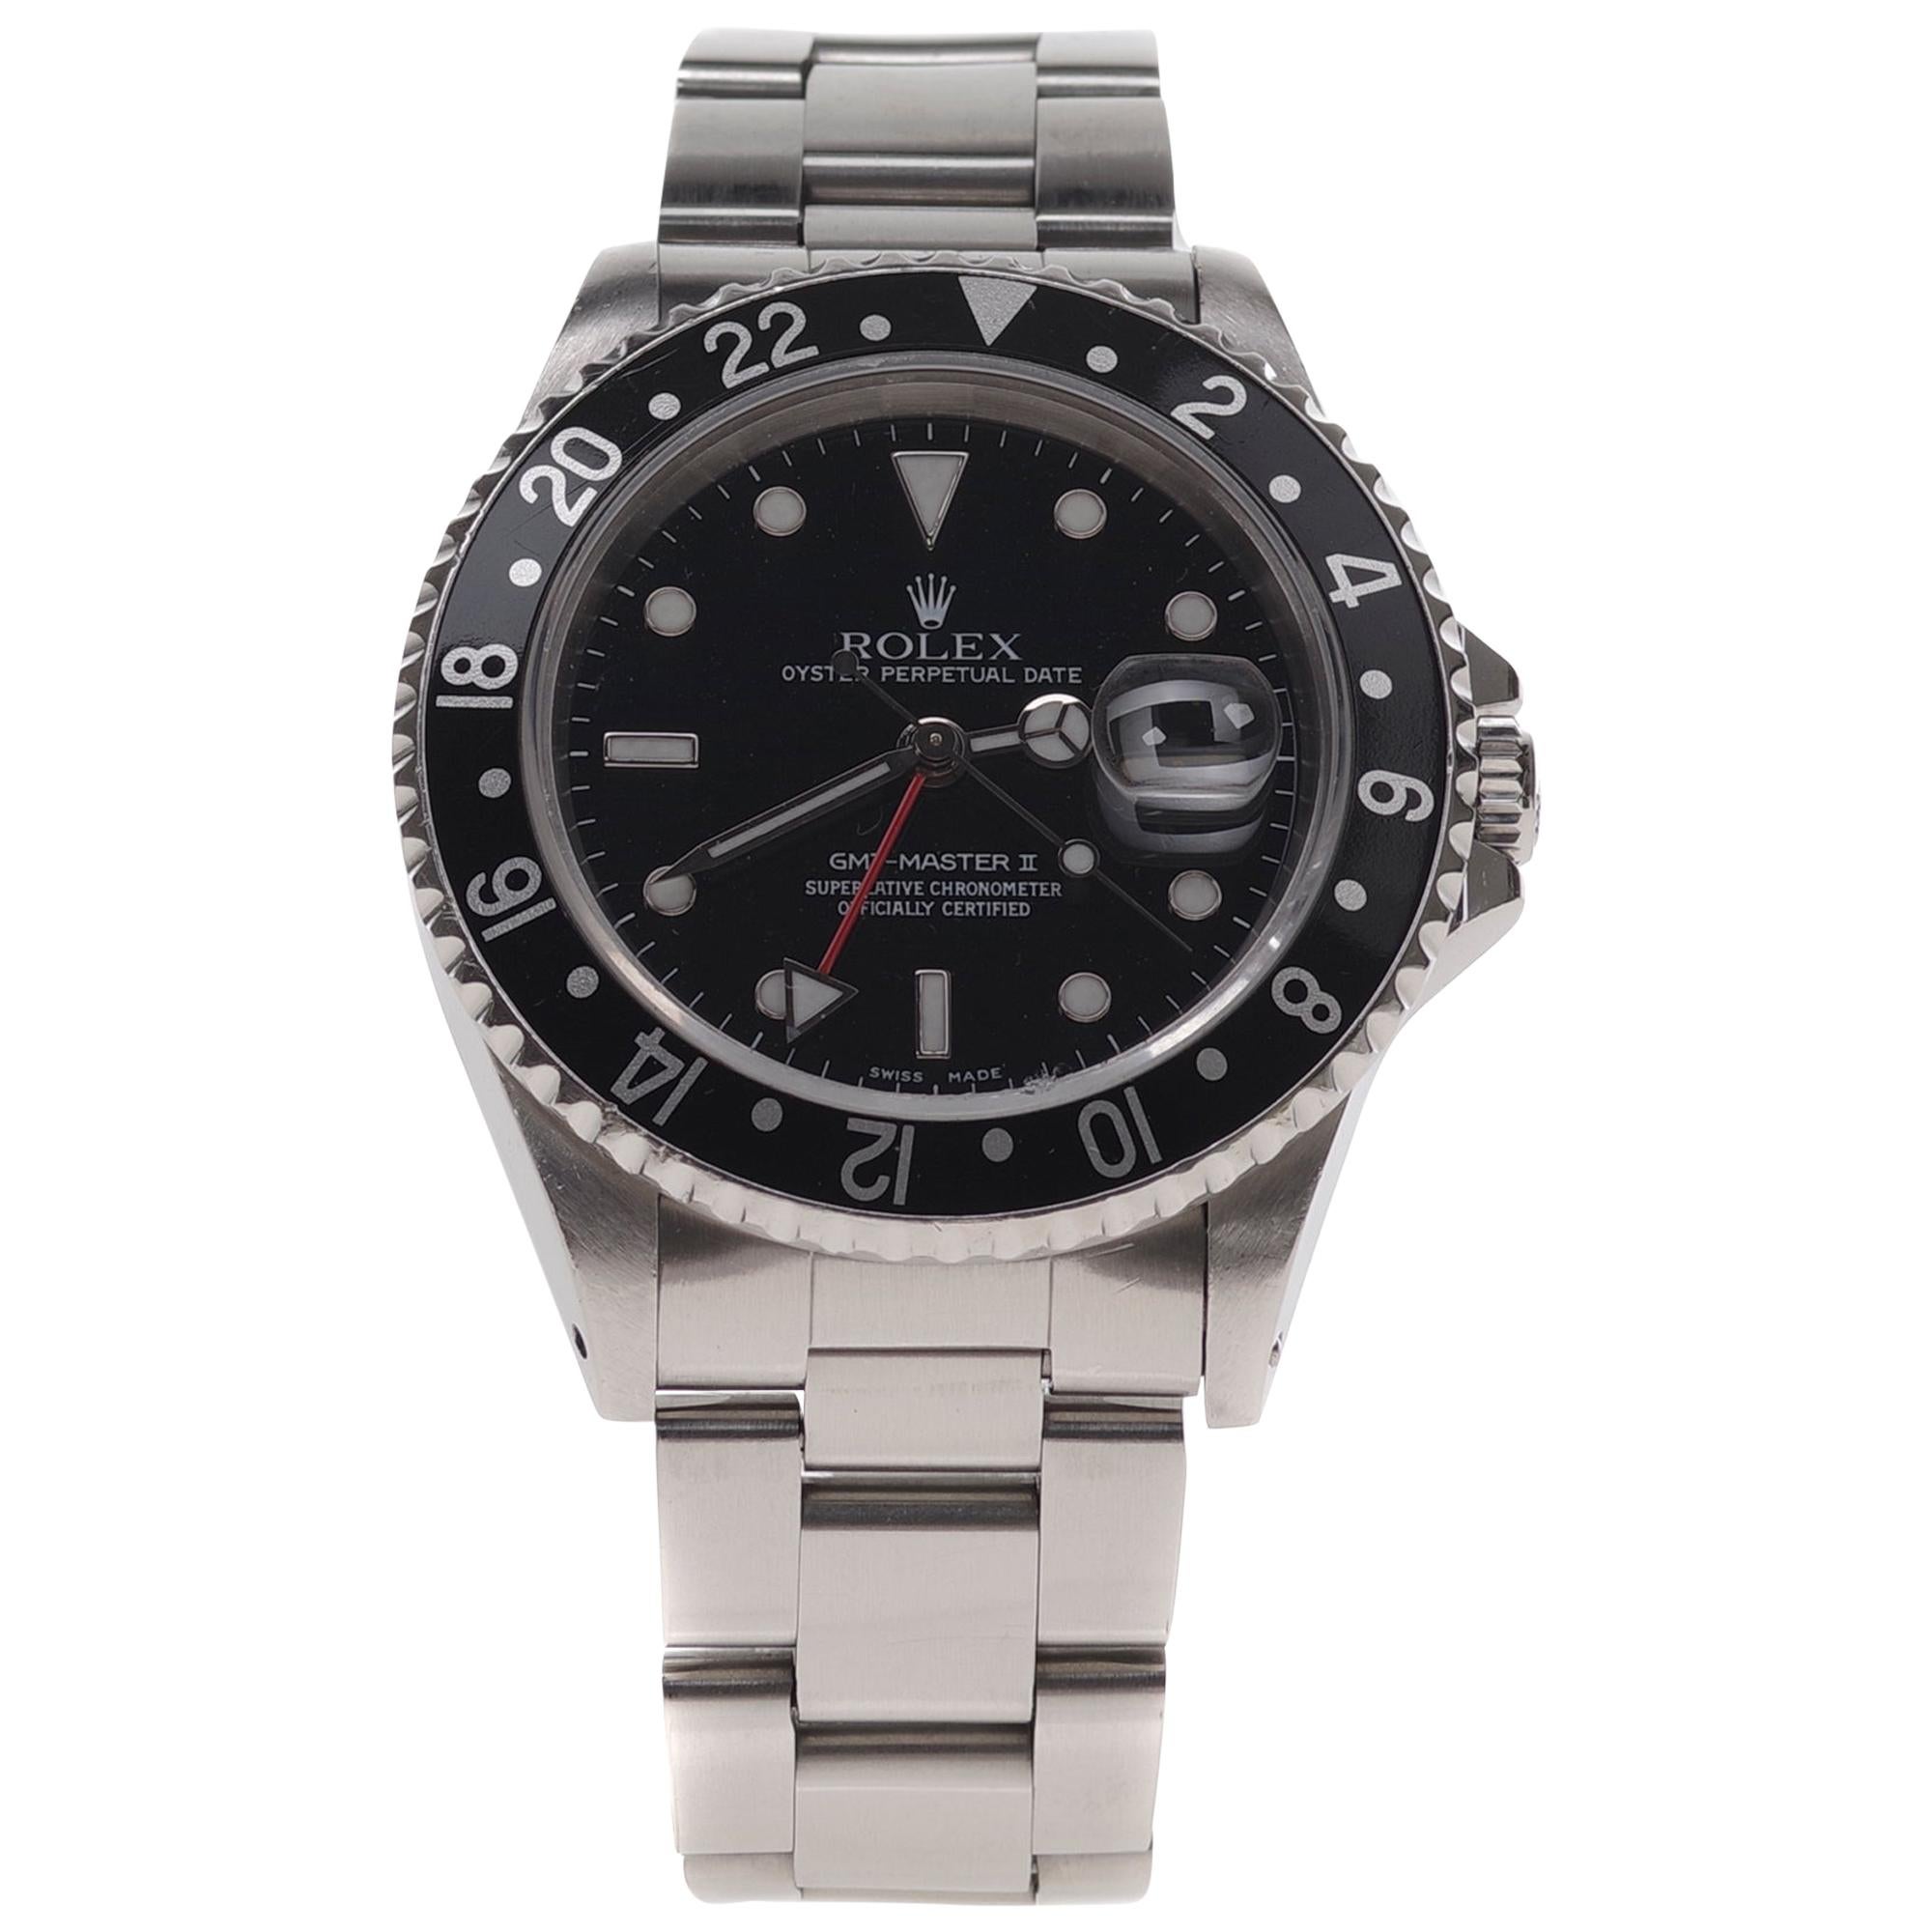 Amazing Rolex GMT - Master II in steel circa 1996 in perfect condition